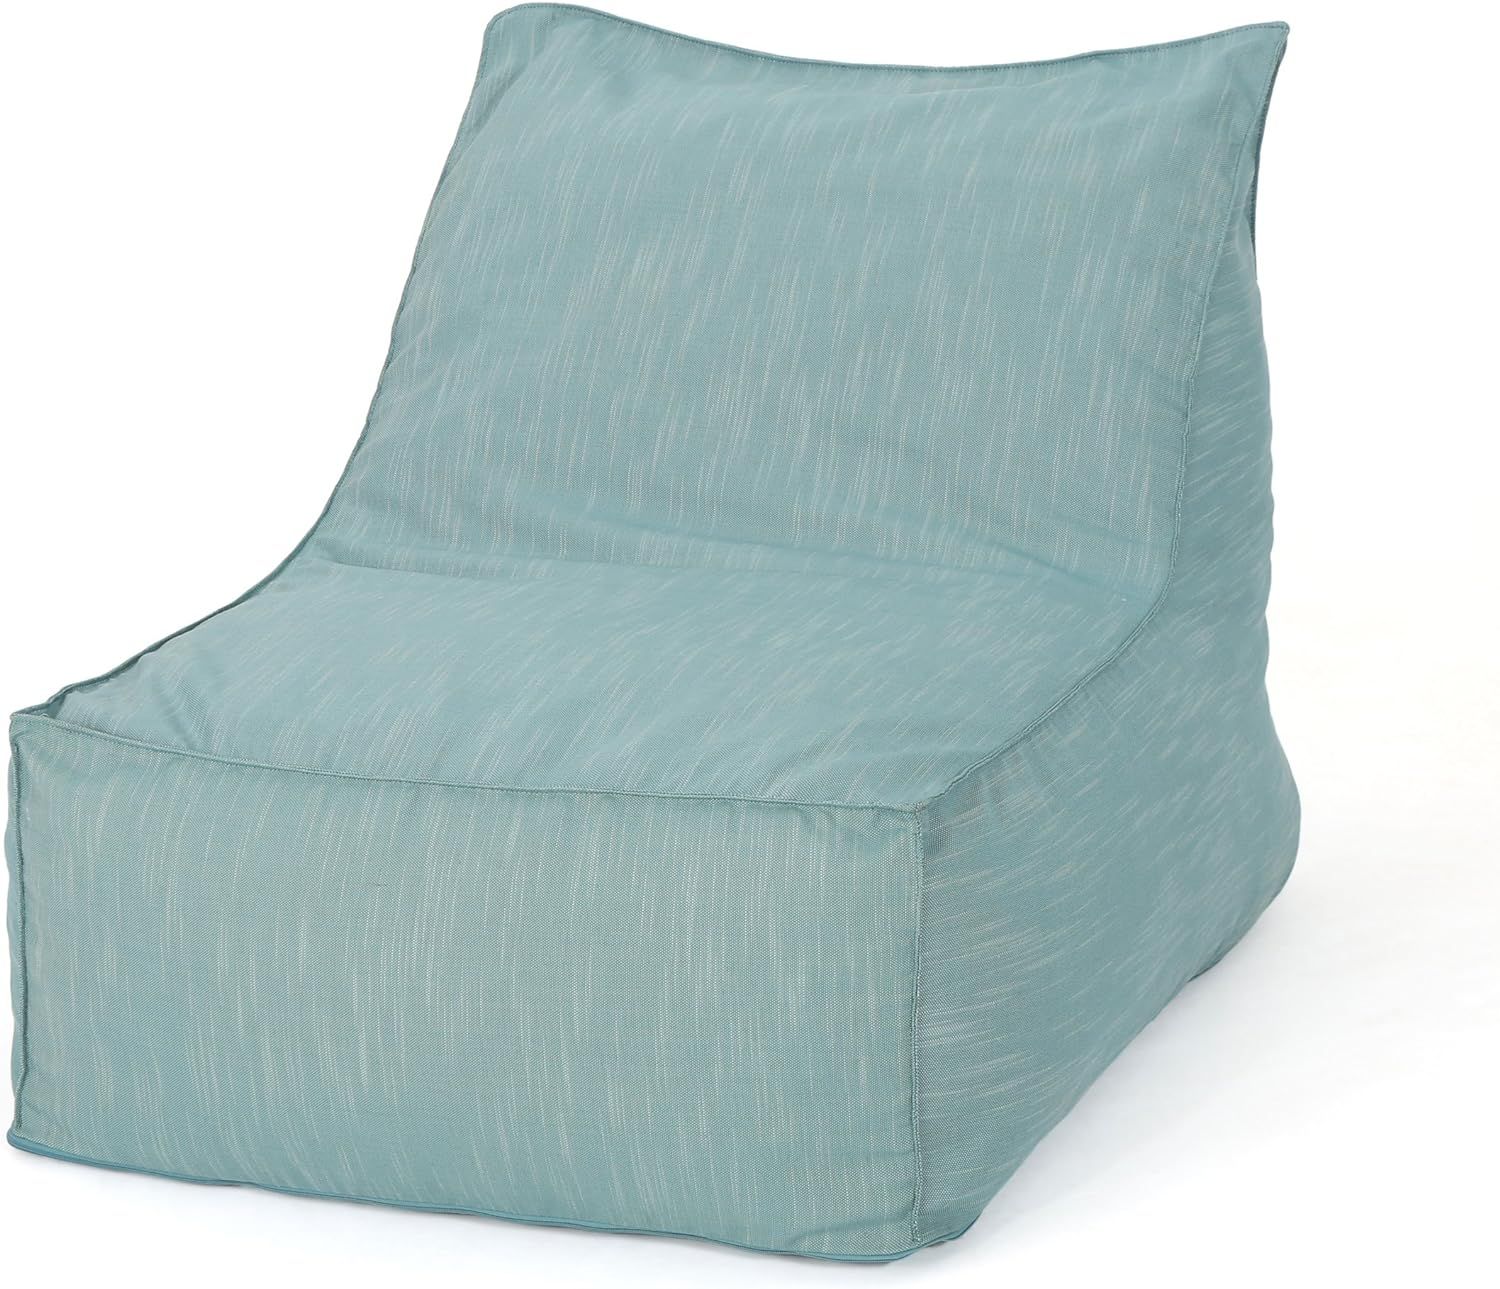 GDFStudio Daisy Outdoor Teal Water Resistant Fabric Bean Bag Lounger | Amazon (US)